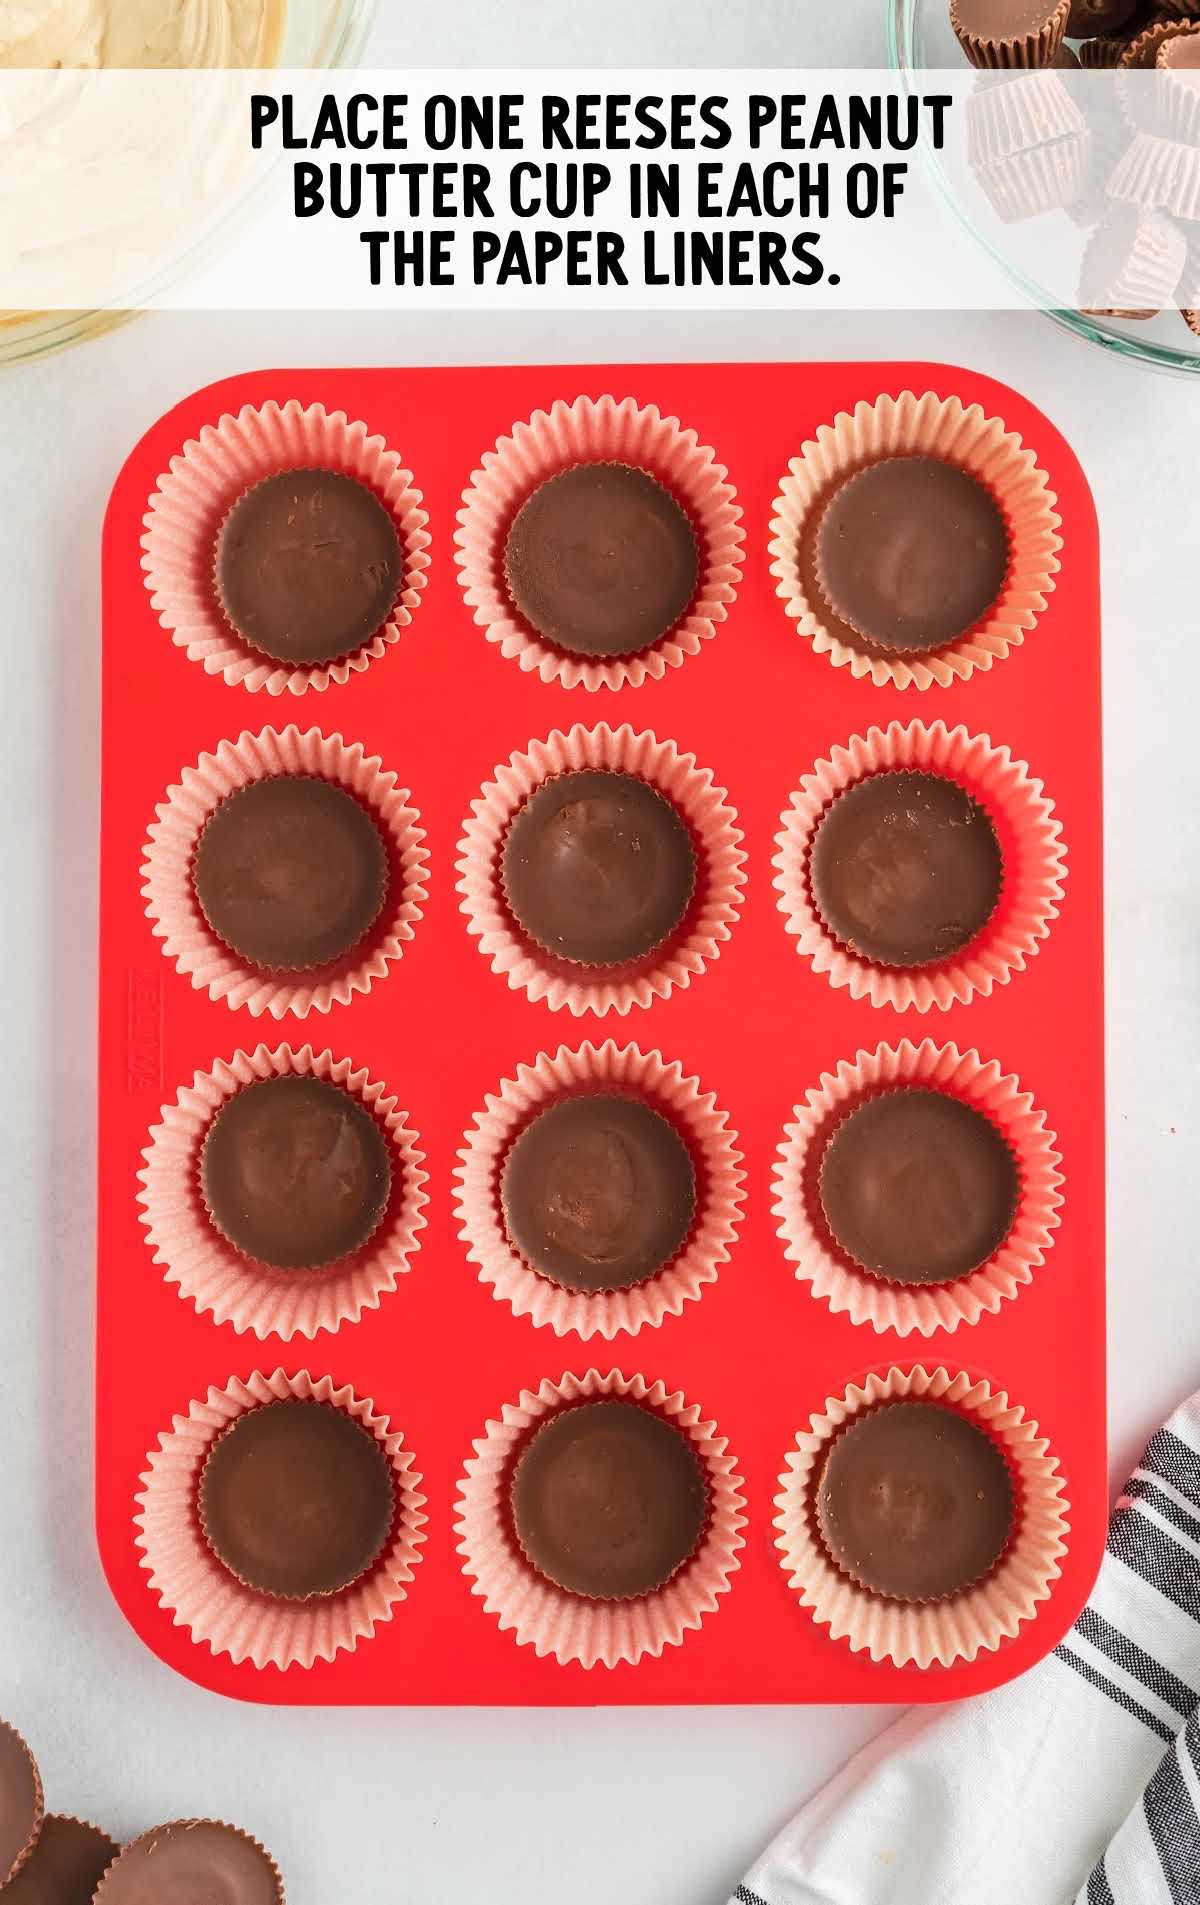 Reeses placed in the paper liner